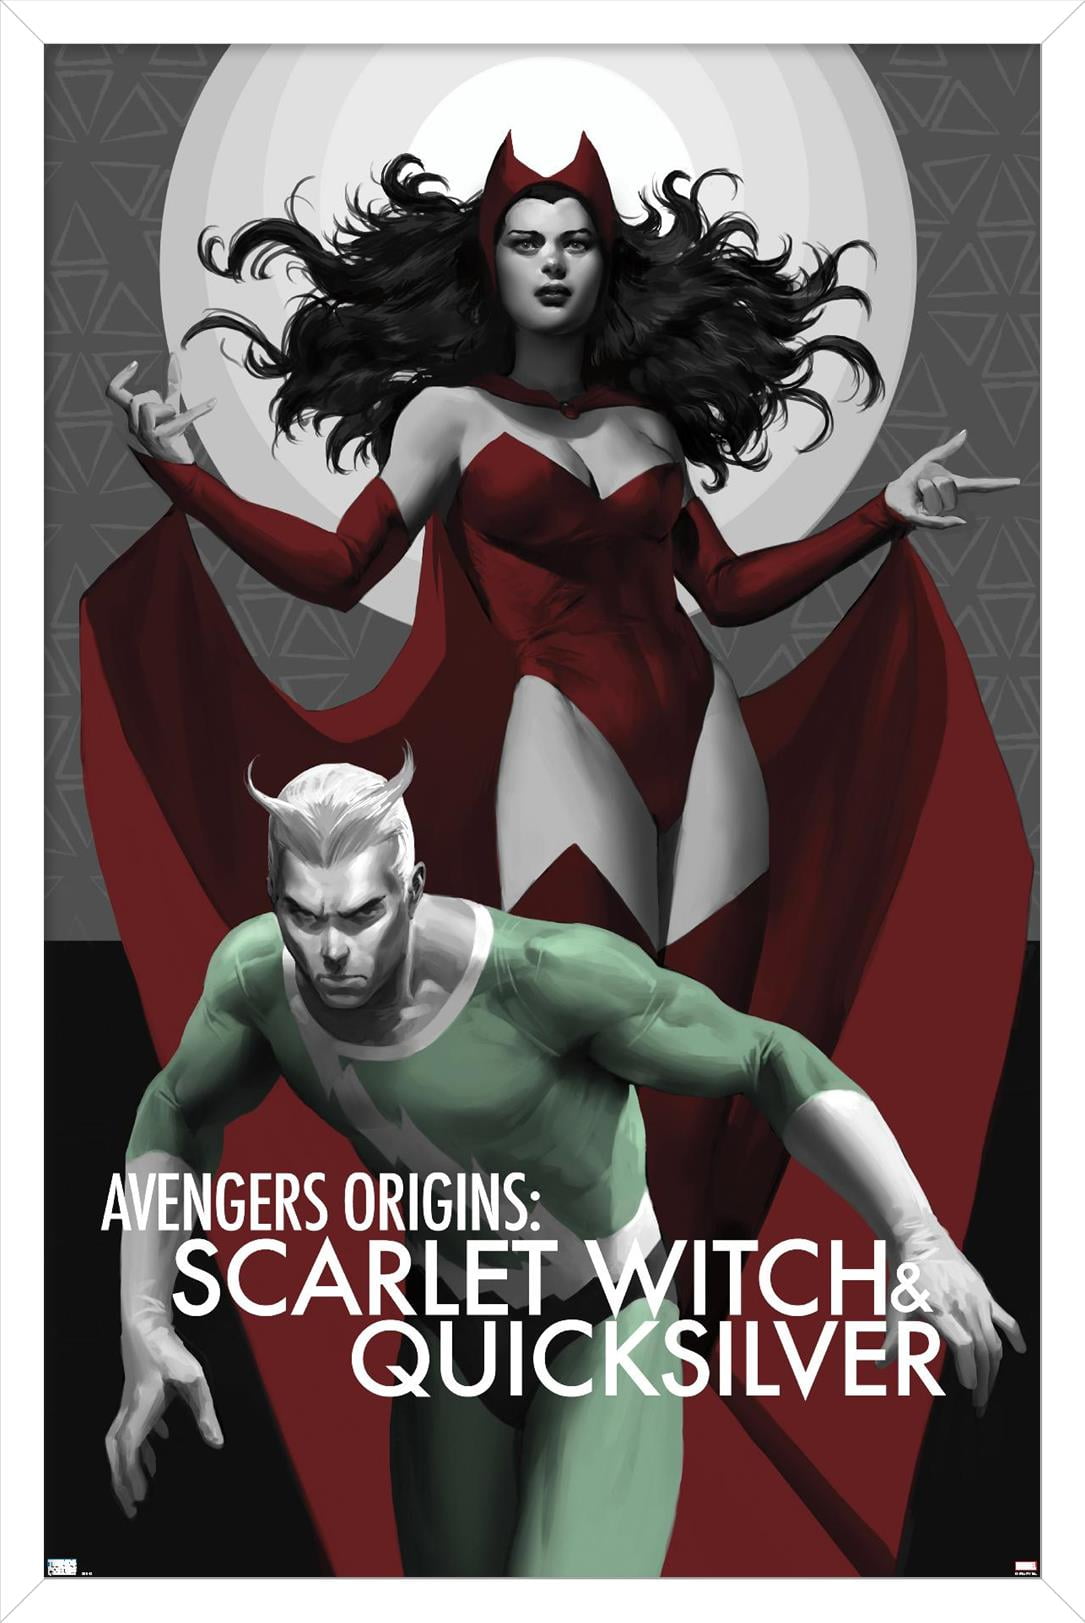 Scarlet Witch and Quicksilver Issue #1